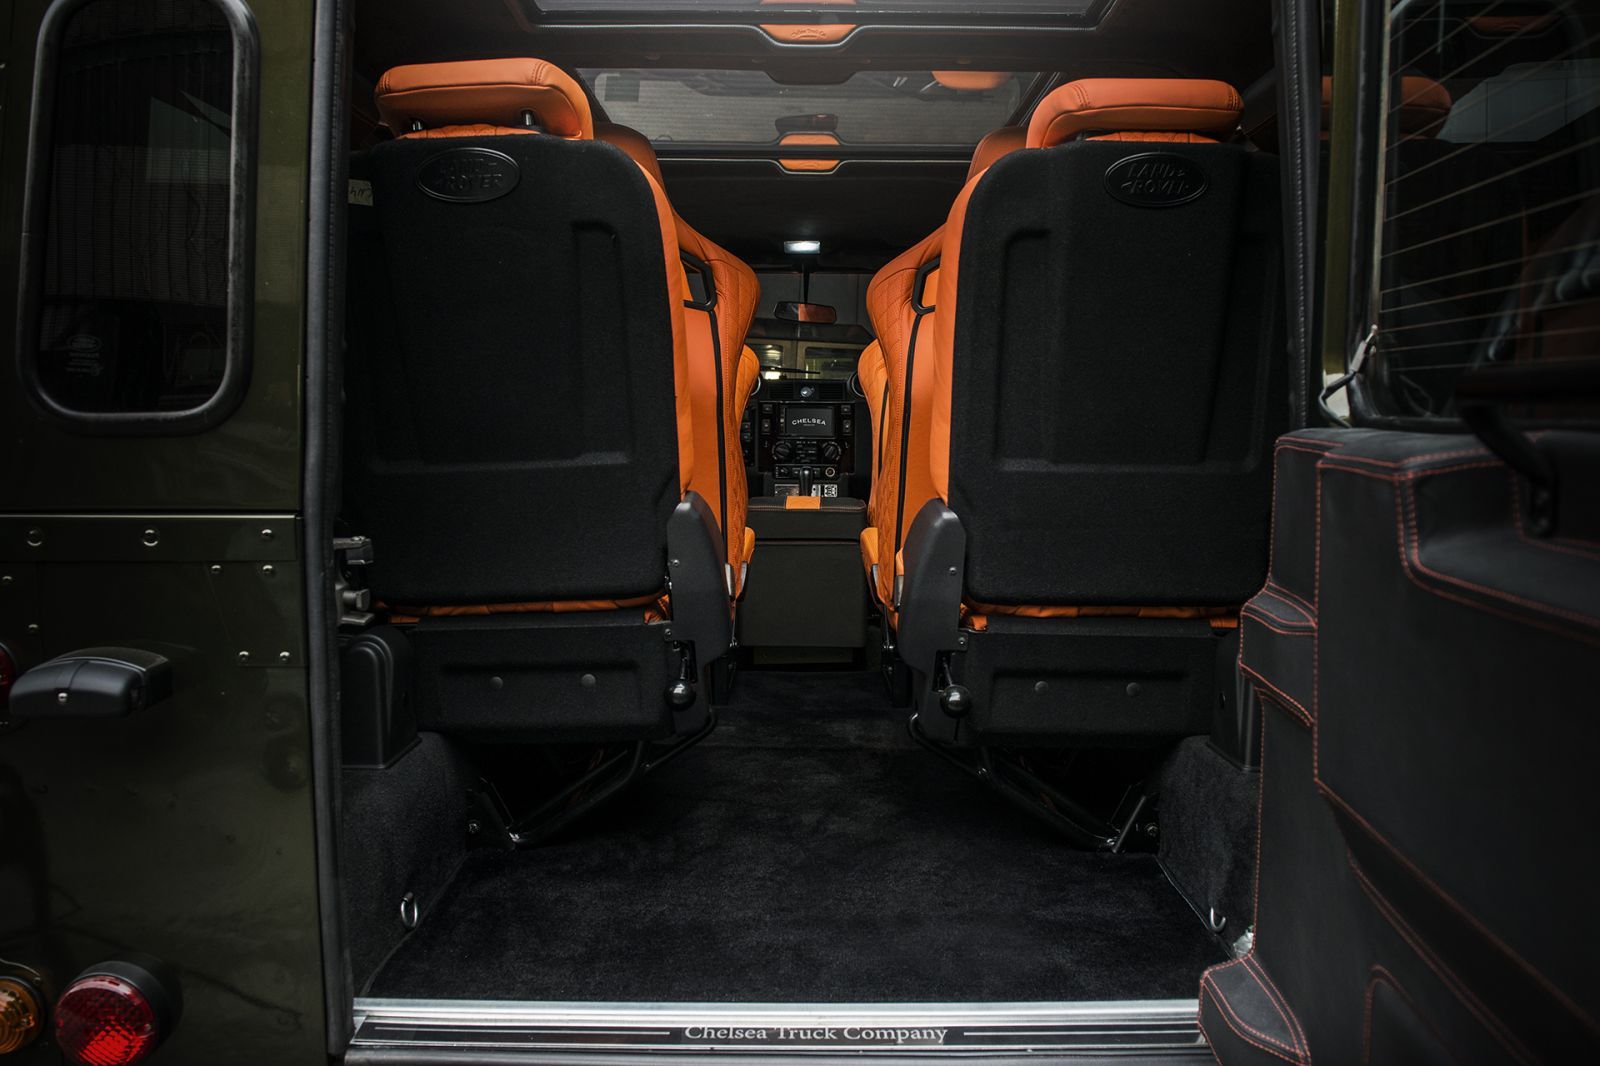 Land Rover Defender 90 (1991-2016) Floor Carpet by Chelsea Truck Company - Image 765